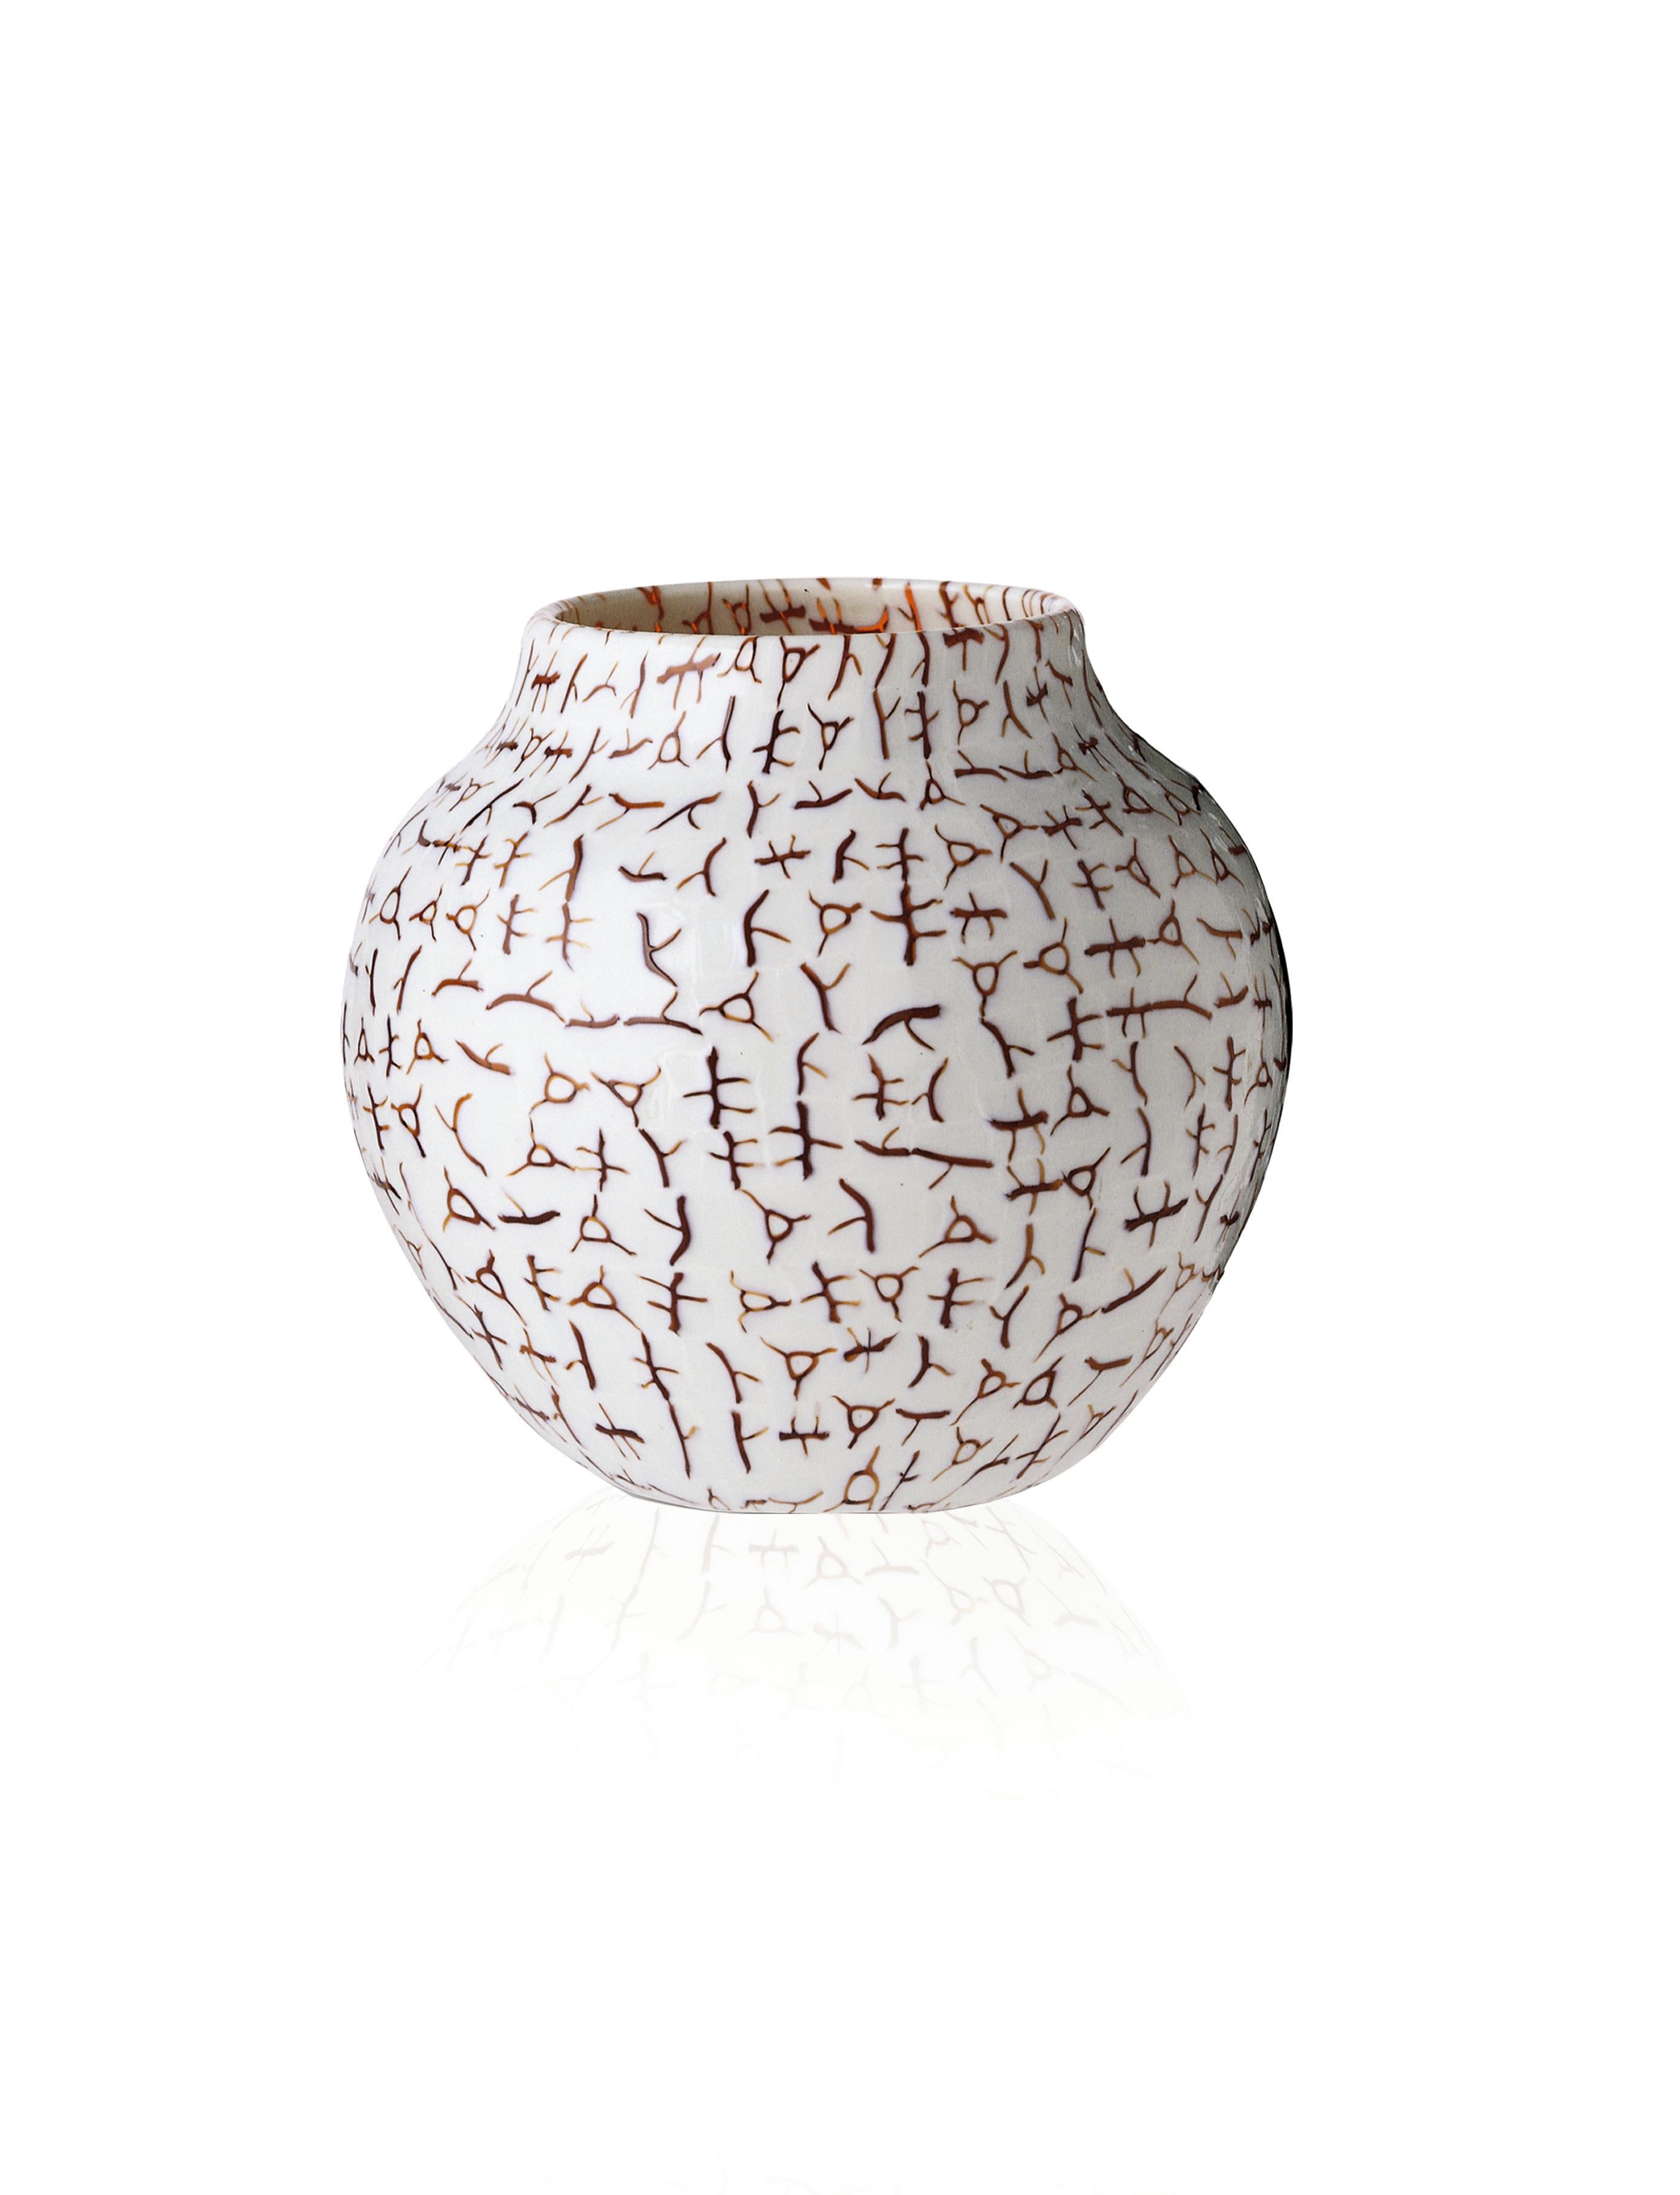 Venini glass vase with cylindrical body and fine line drawn pattern across glass surface. Featured in tea and ivory colored class designed in 1984. Perfect for indoor home decor as container or strong statement piece for any room.

Dimensions: 18